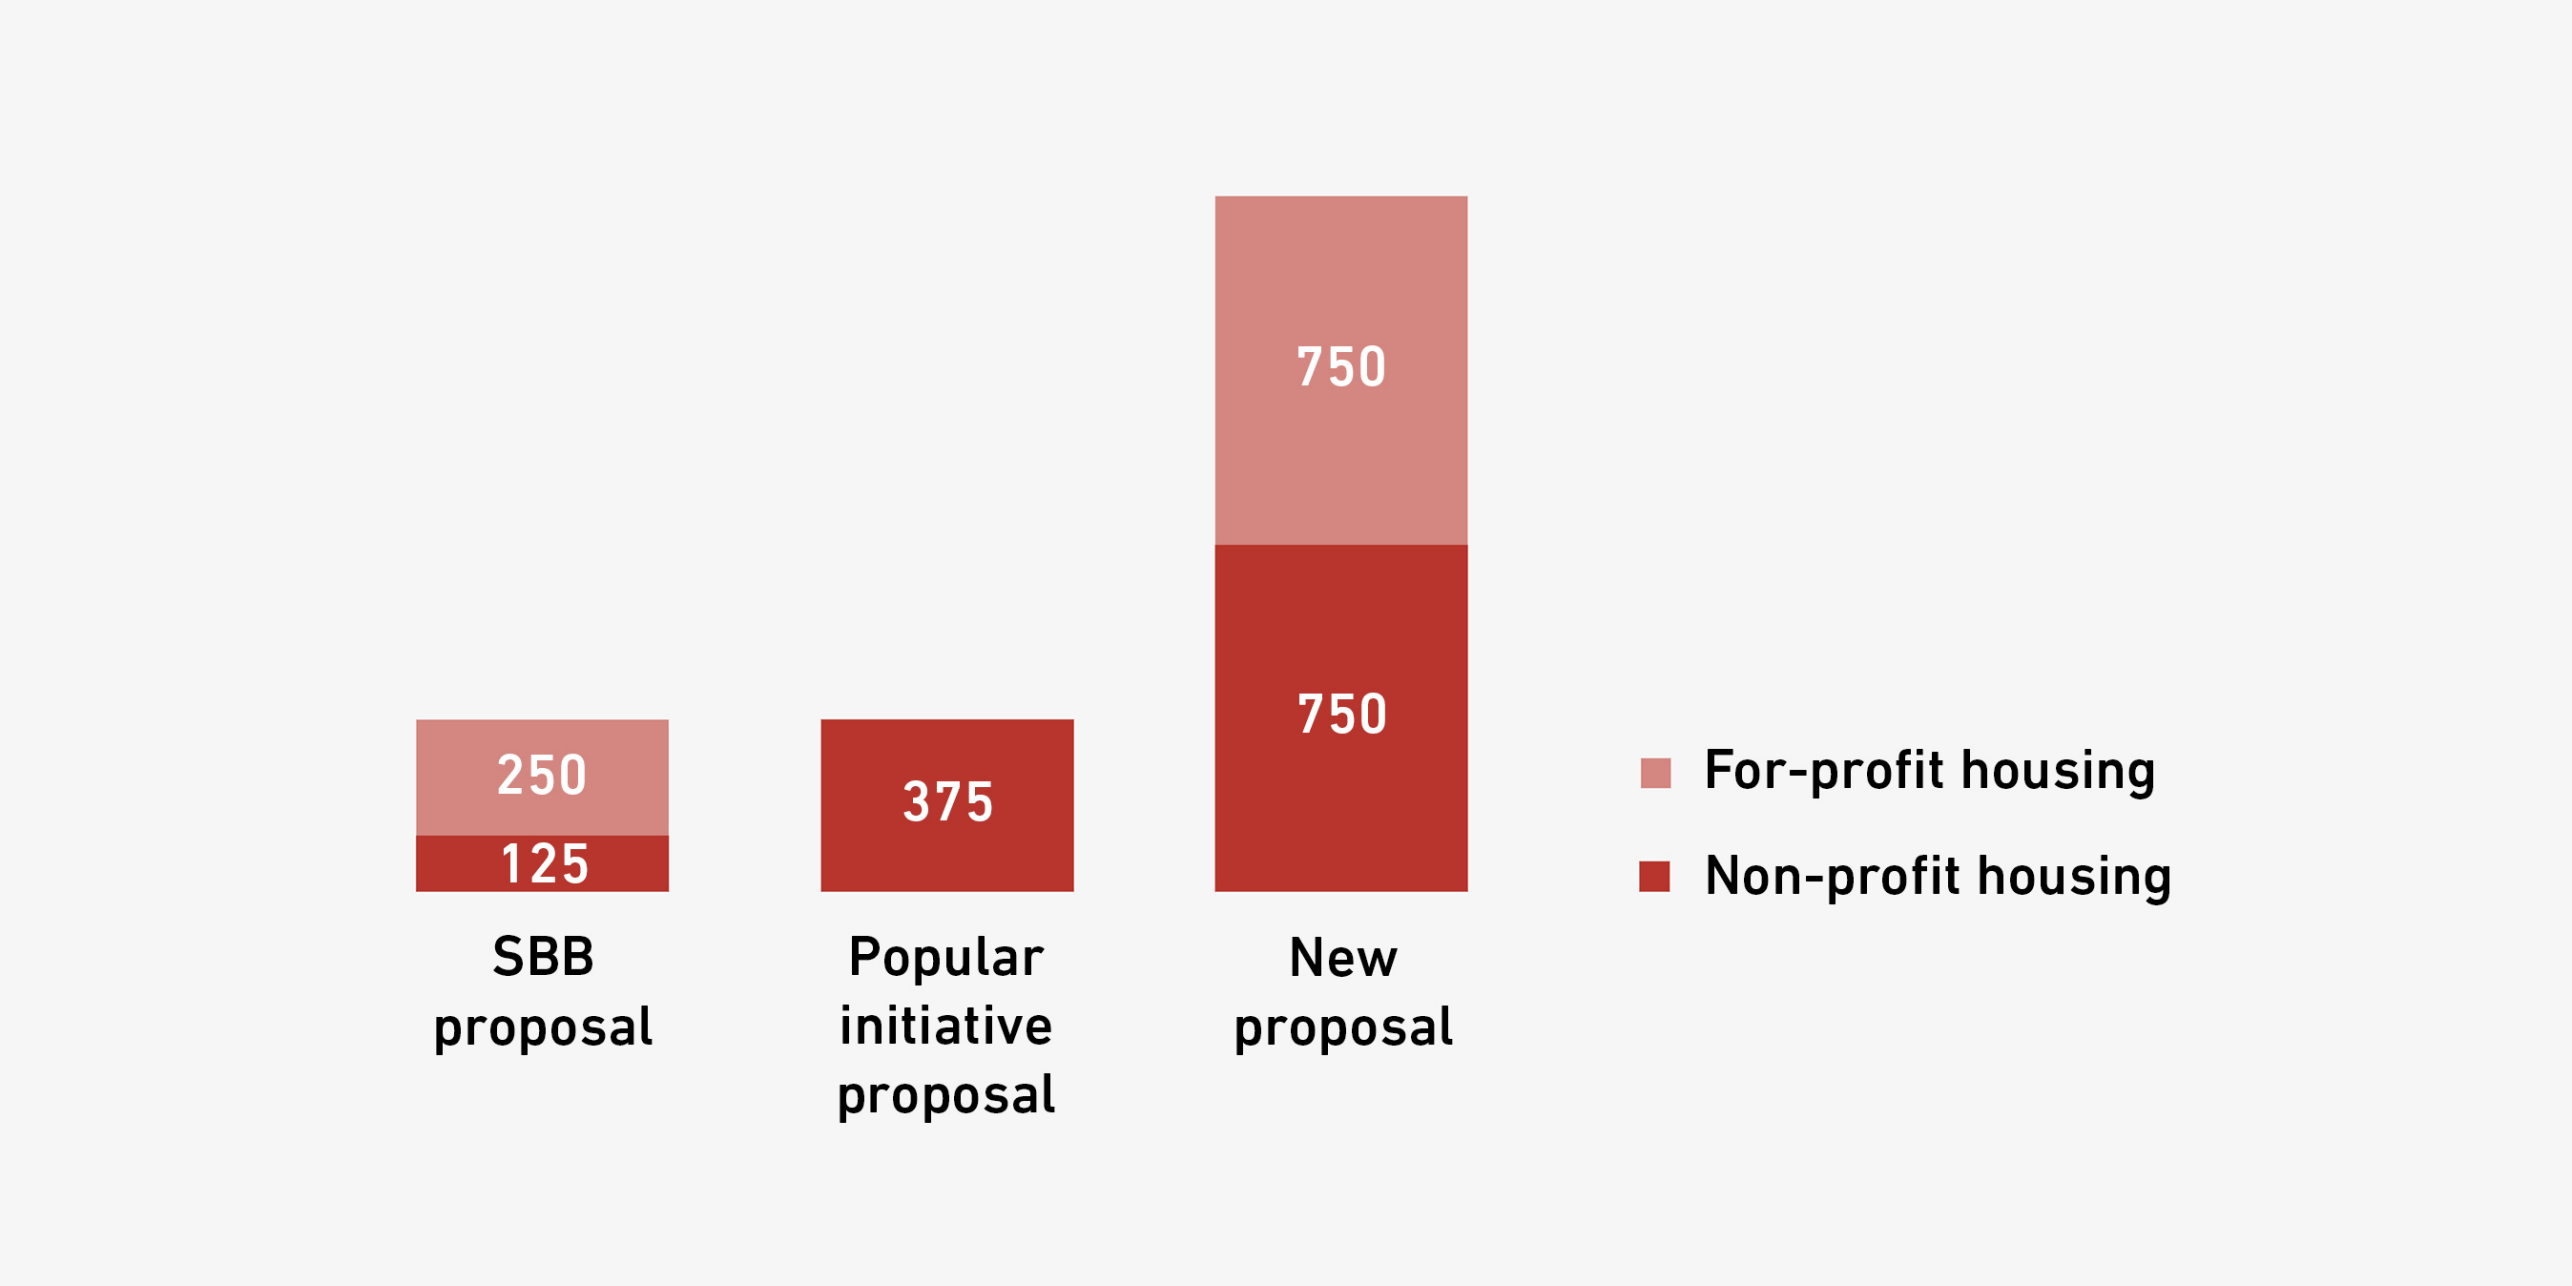 The bar chart shows the proportions of non-profit and non-profit housing from the different proposals. The SBB proposal provides for 250 for-profit and 125 non-profit flats, the initiative proposes 375 non-profit flats and the proposal by Dr. Sybille Wälty includes 750 non-profit and 750 for-profit flats.